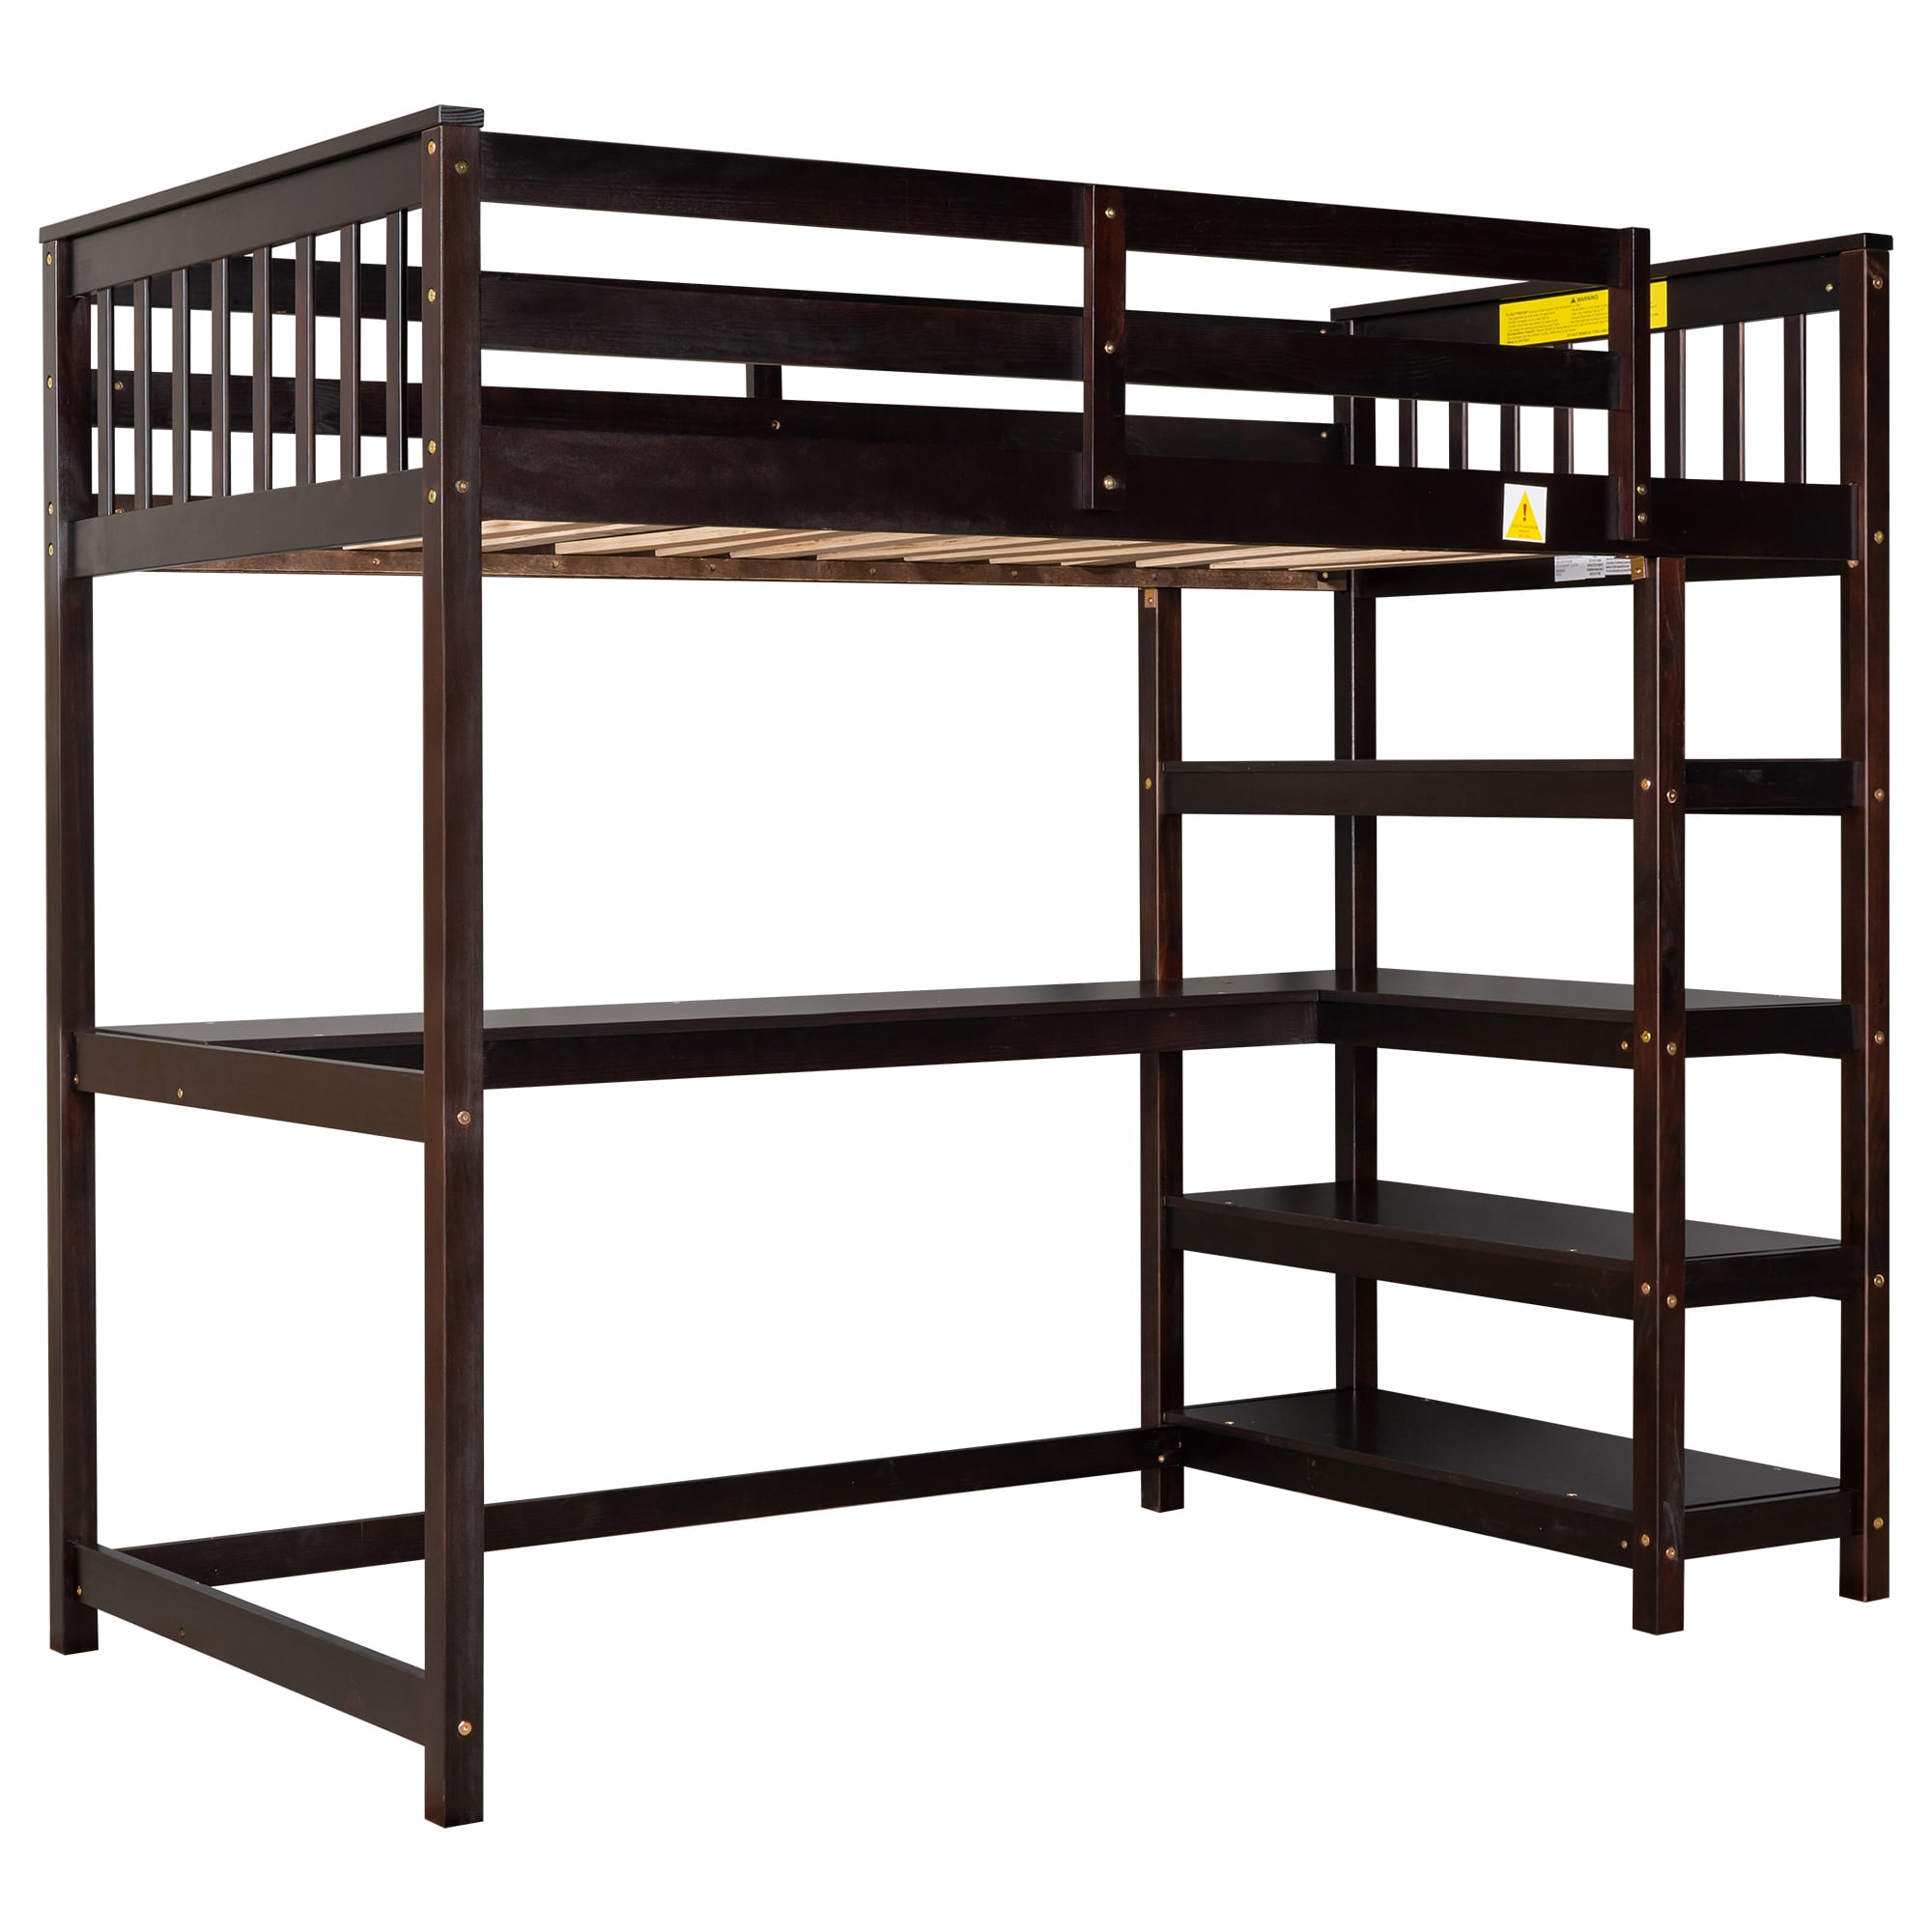 Sumyeg Wooden twin size loft bed Gray Twin Loft Bunk Bed in the Bunk ...